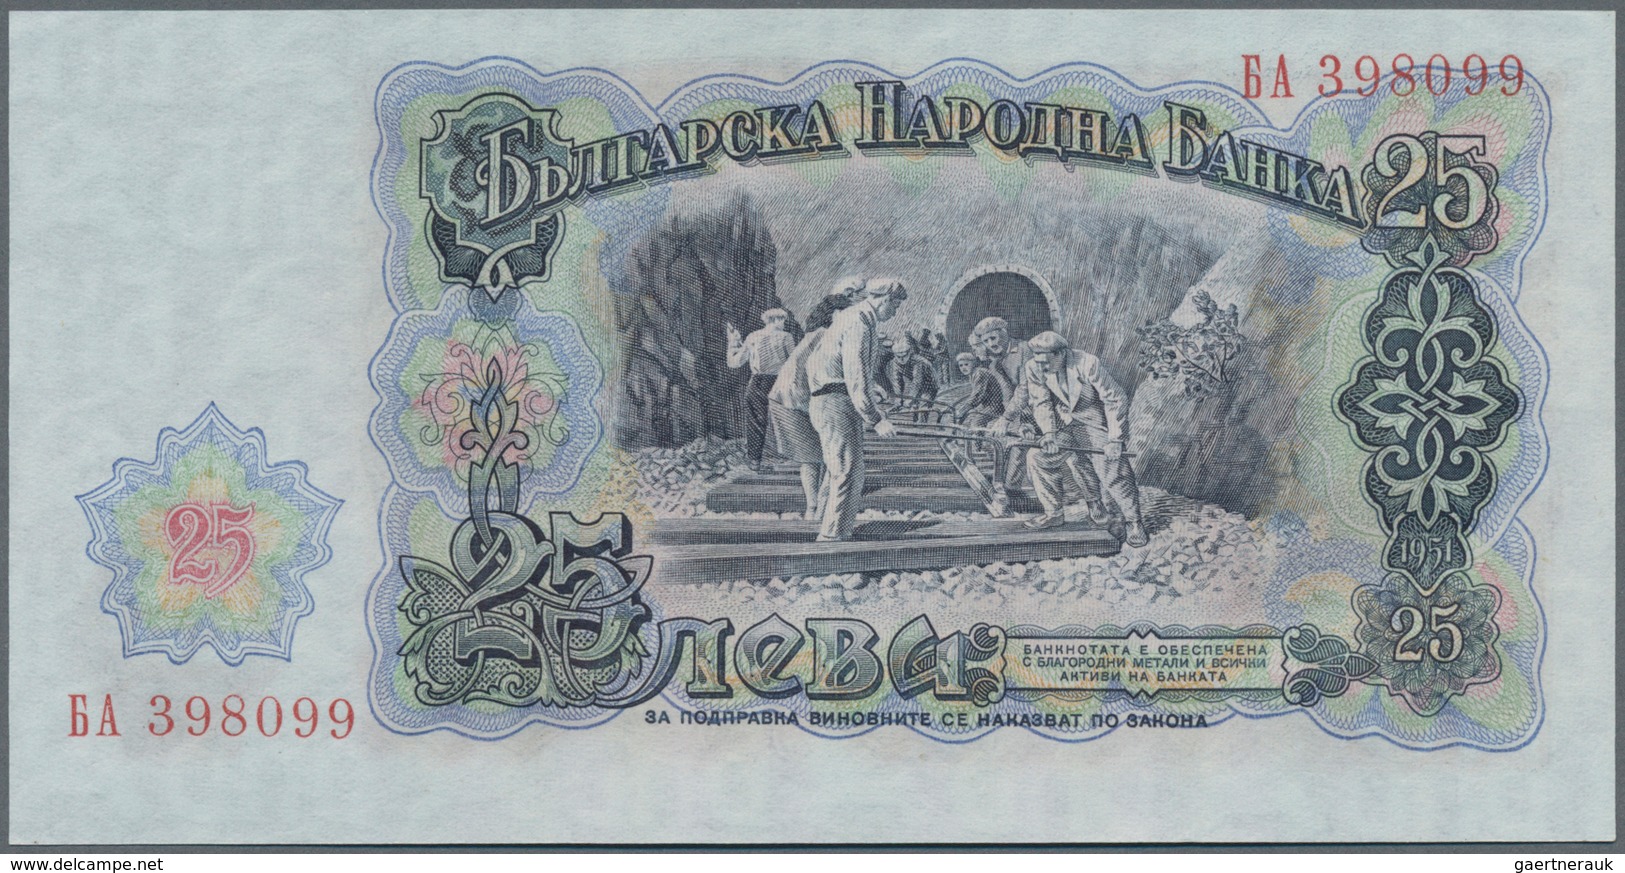 Bulgaria / Bulgarien: Very nice set with 20 Banknotes 1 - 500 Leva 1951-1990, P.80a-98, all in aUNC/